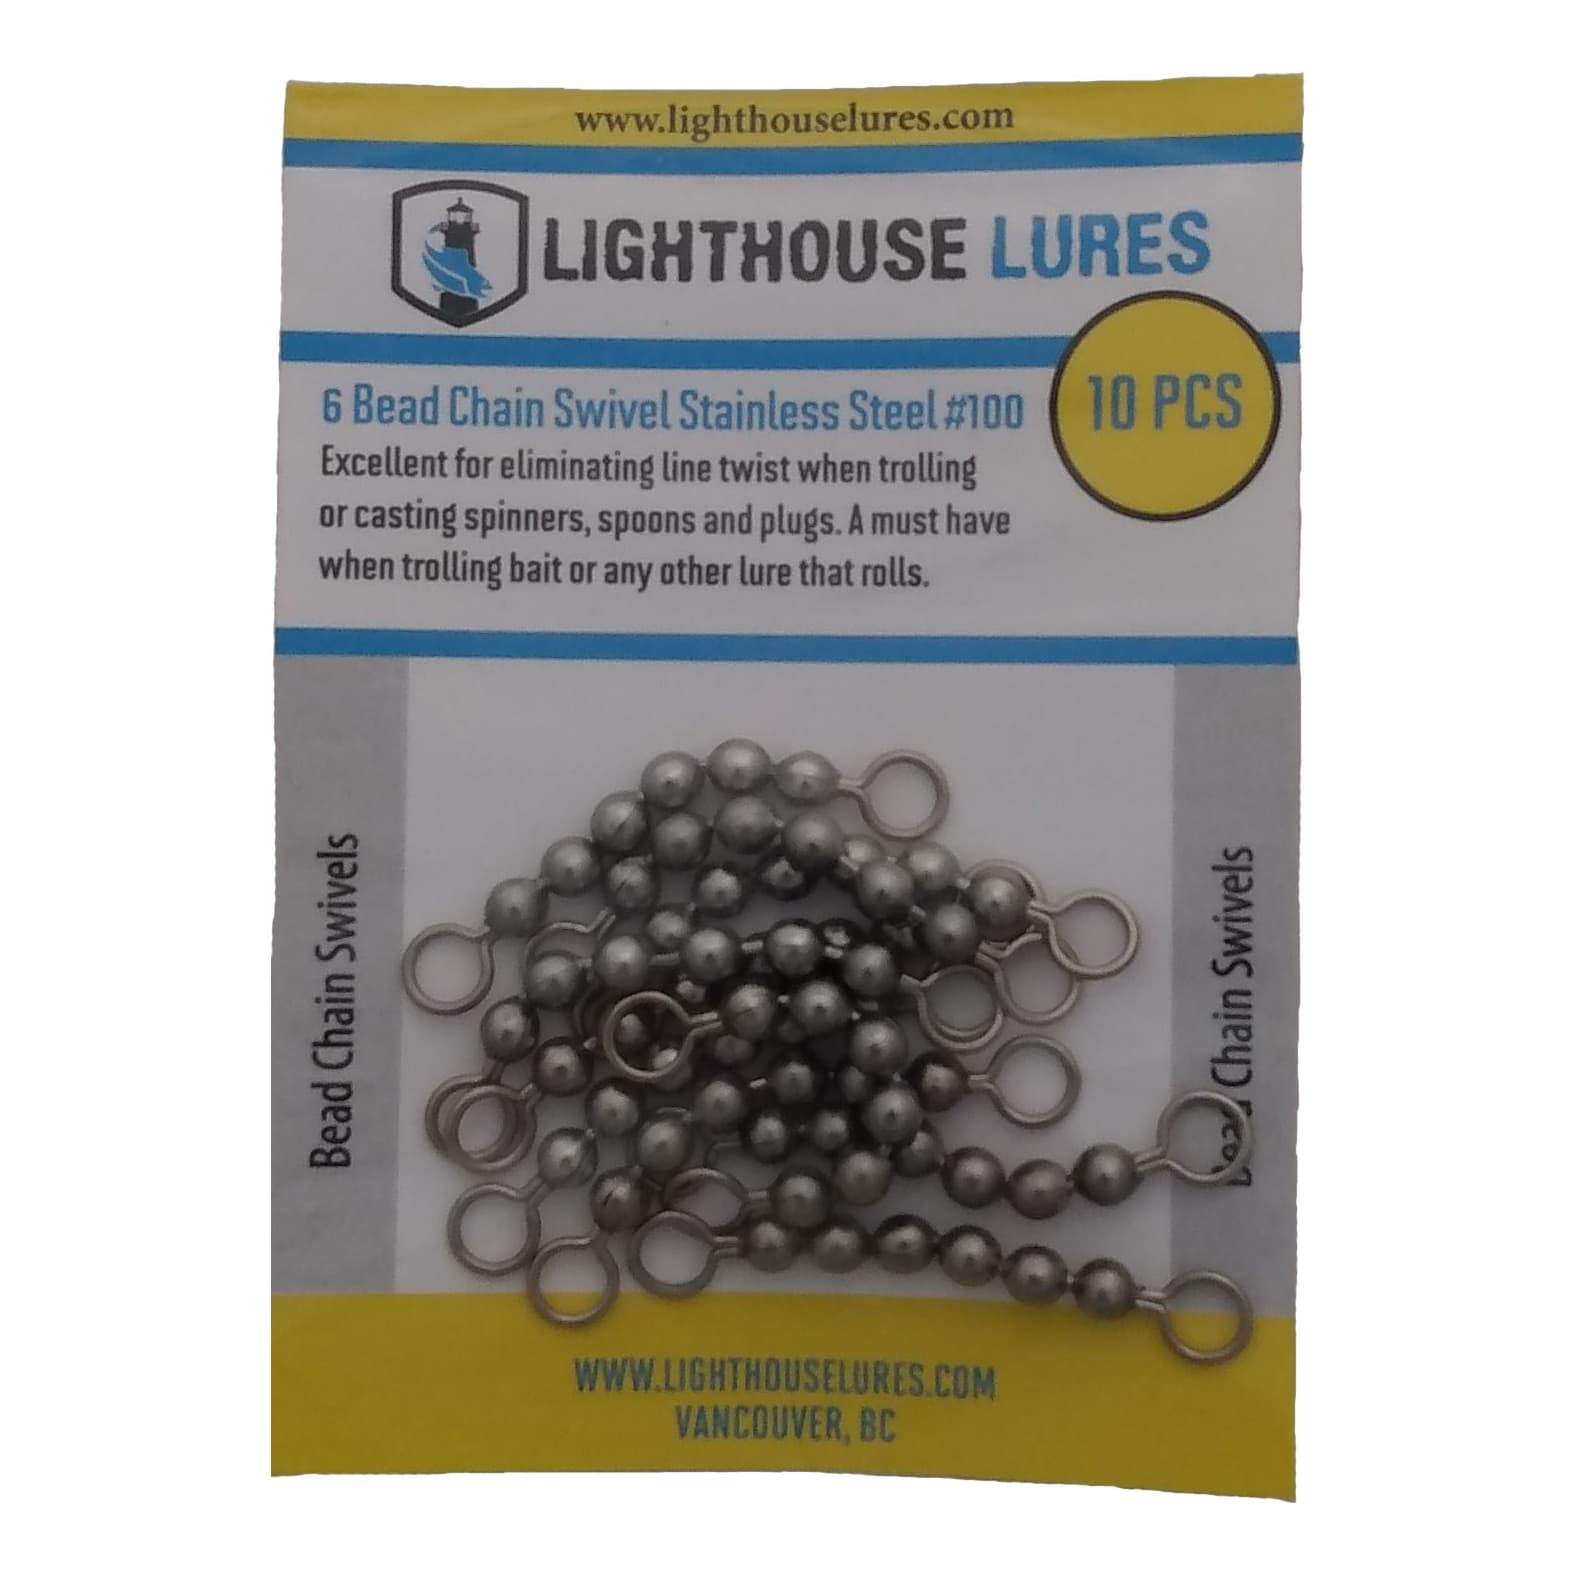 Lighthouse Lures Stainless Steel Bead Chain Swivels - Cabelas 